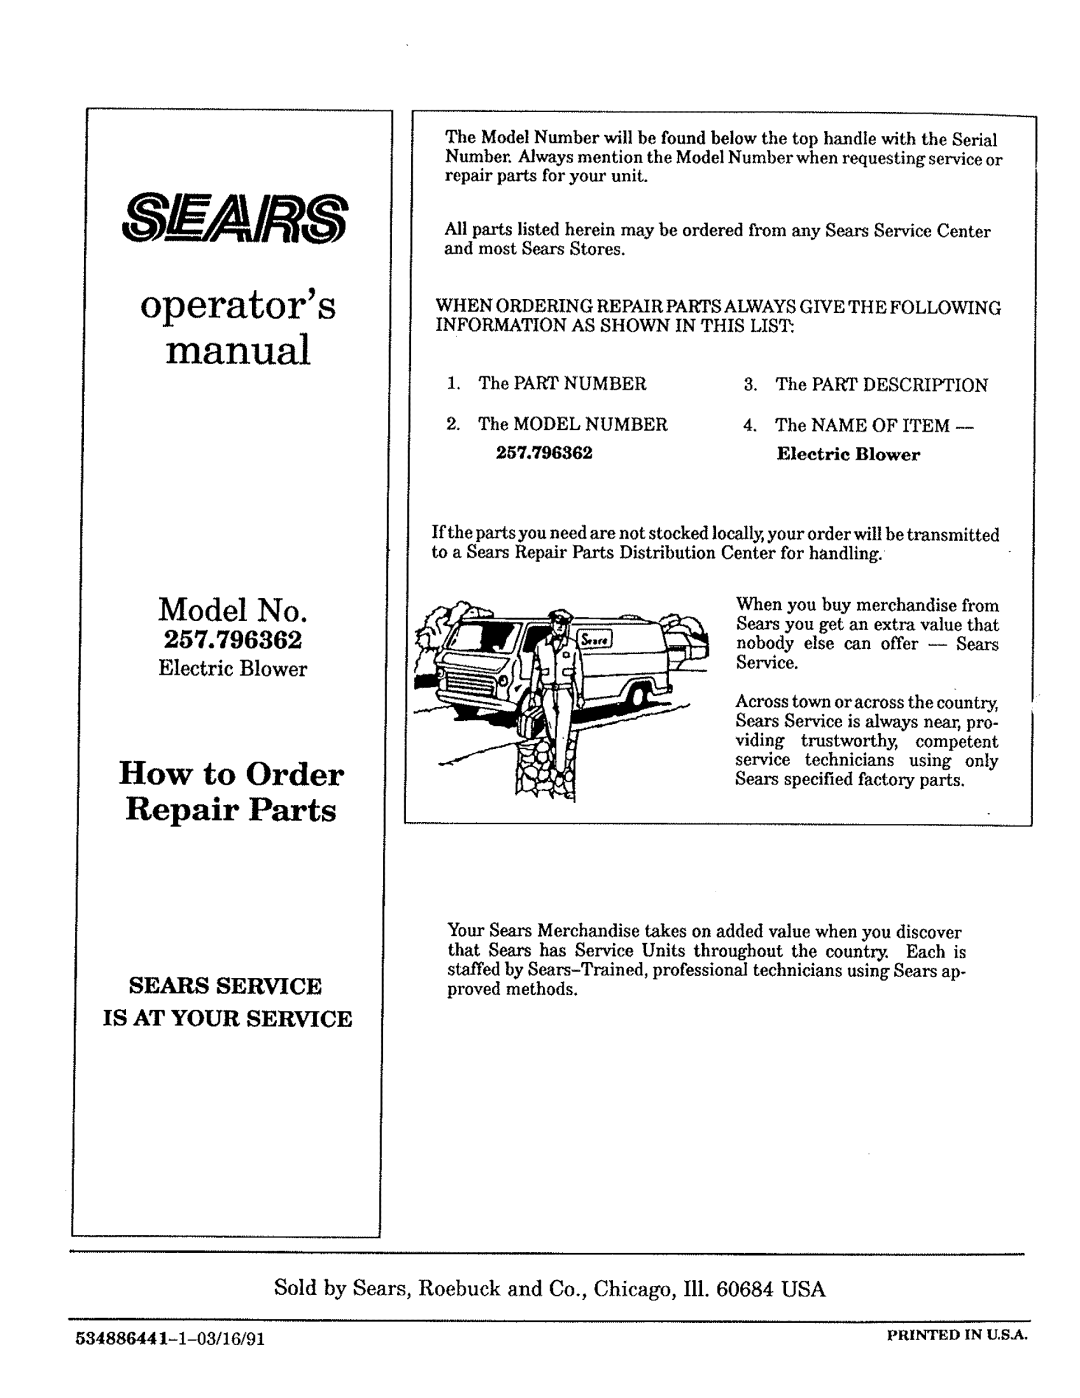 Craftsman 79636 operators, How to Order Repair Parts, Electric Blower, Sears Service, Is At Your Service, manual, Model No 